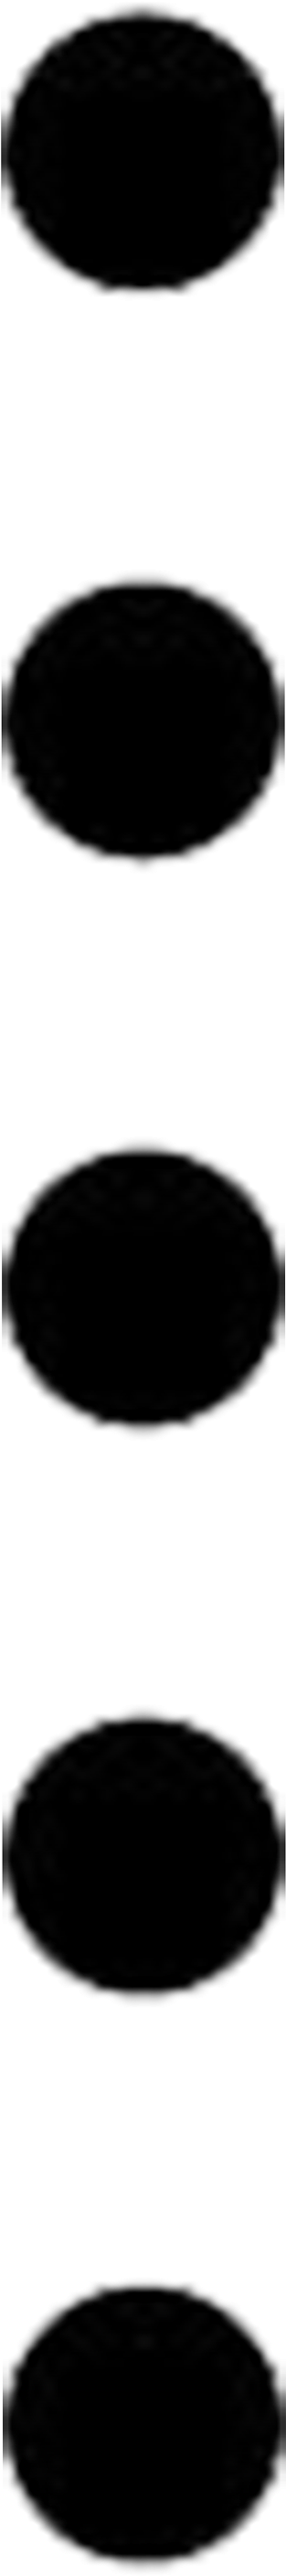 A Black Circle With White Circle In Center